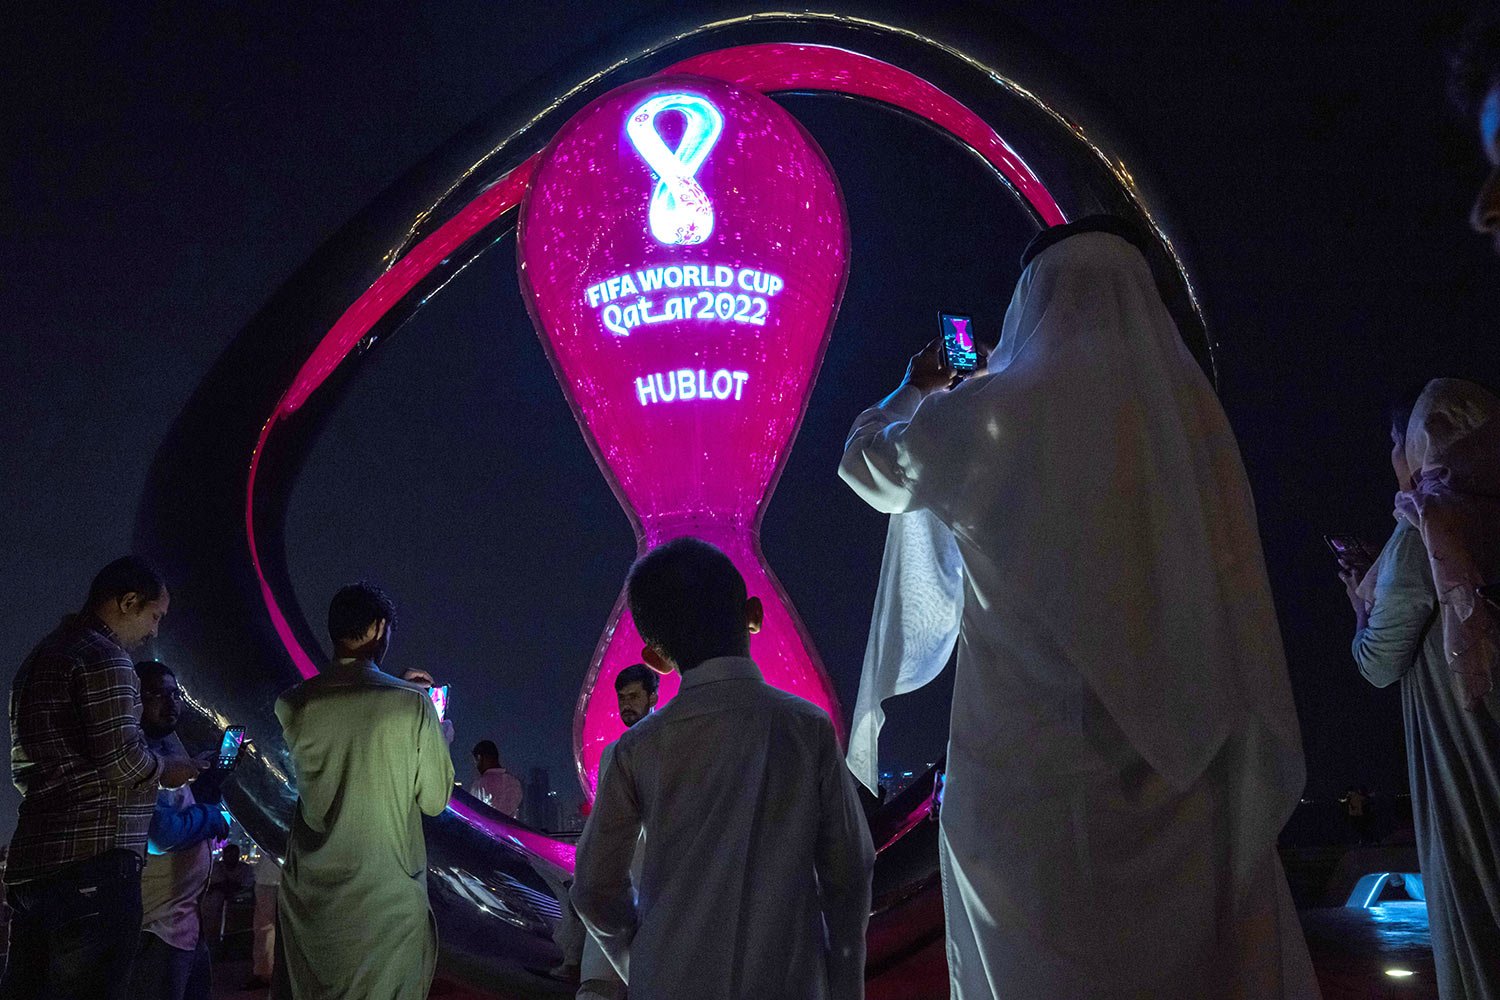  People take photos with the official FIFA World Cup Countdown Clock on Doha's corniche, in Qatar, Friday, Oct. 14, 2022. (AP Photo/Nariman El-Mofty) 